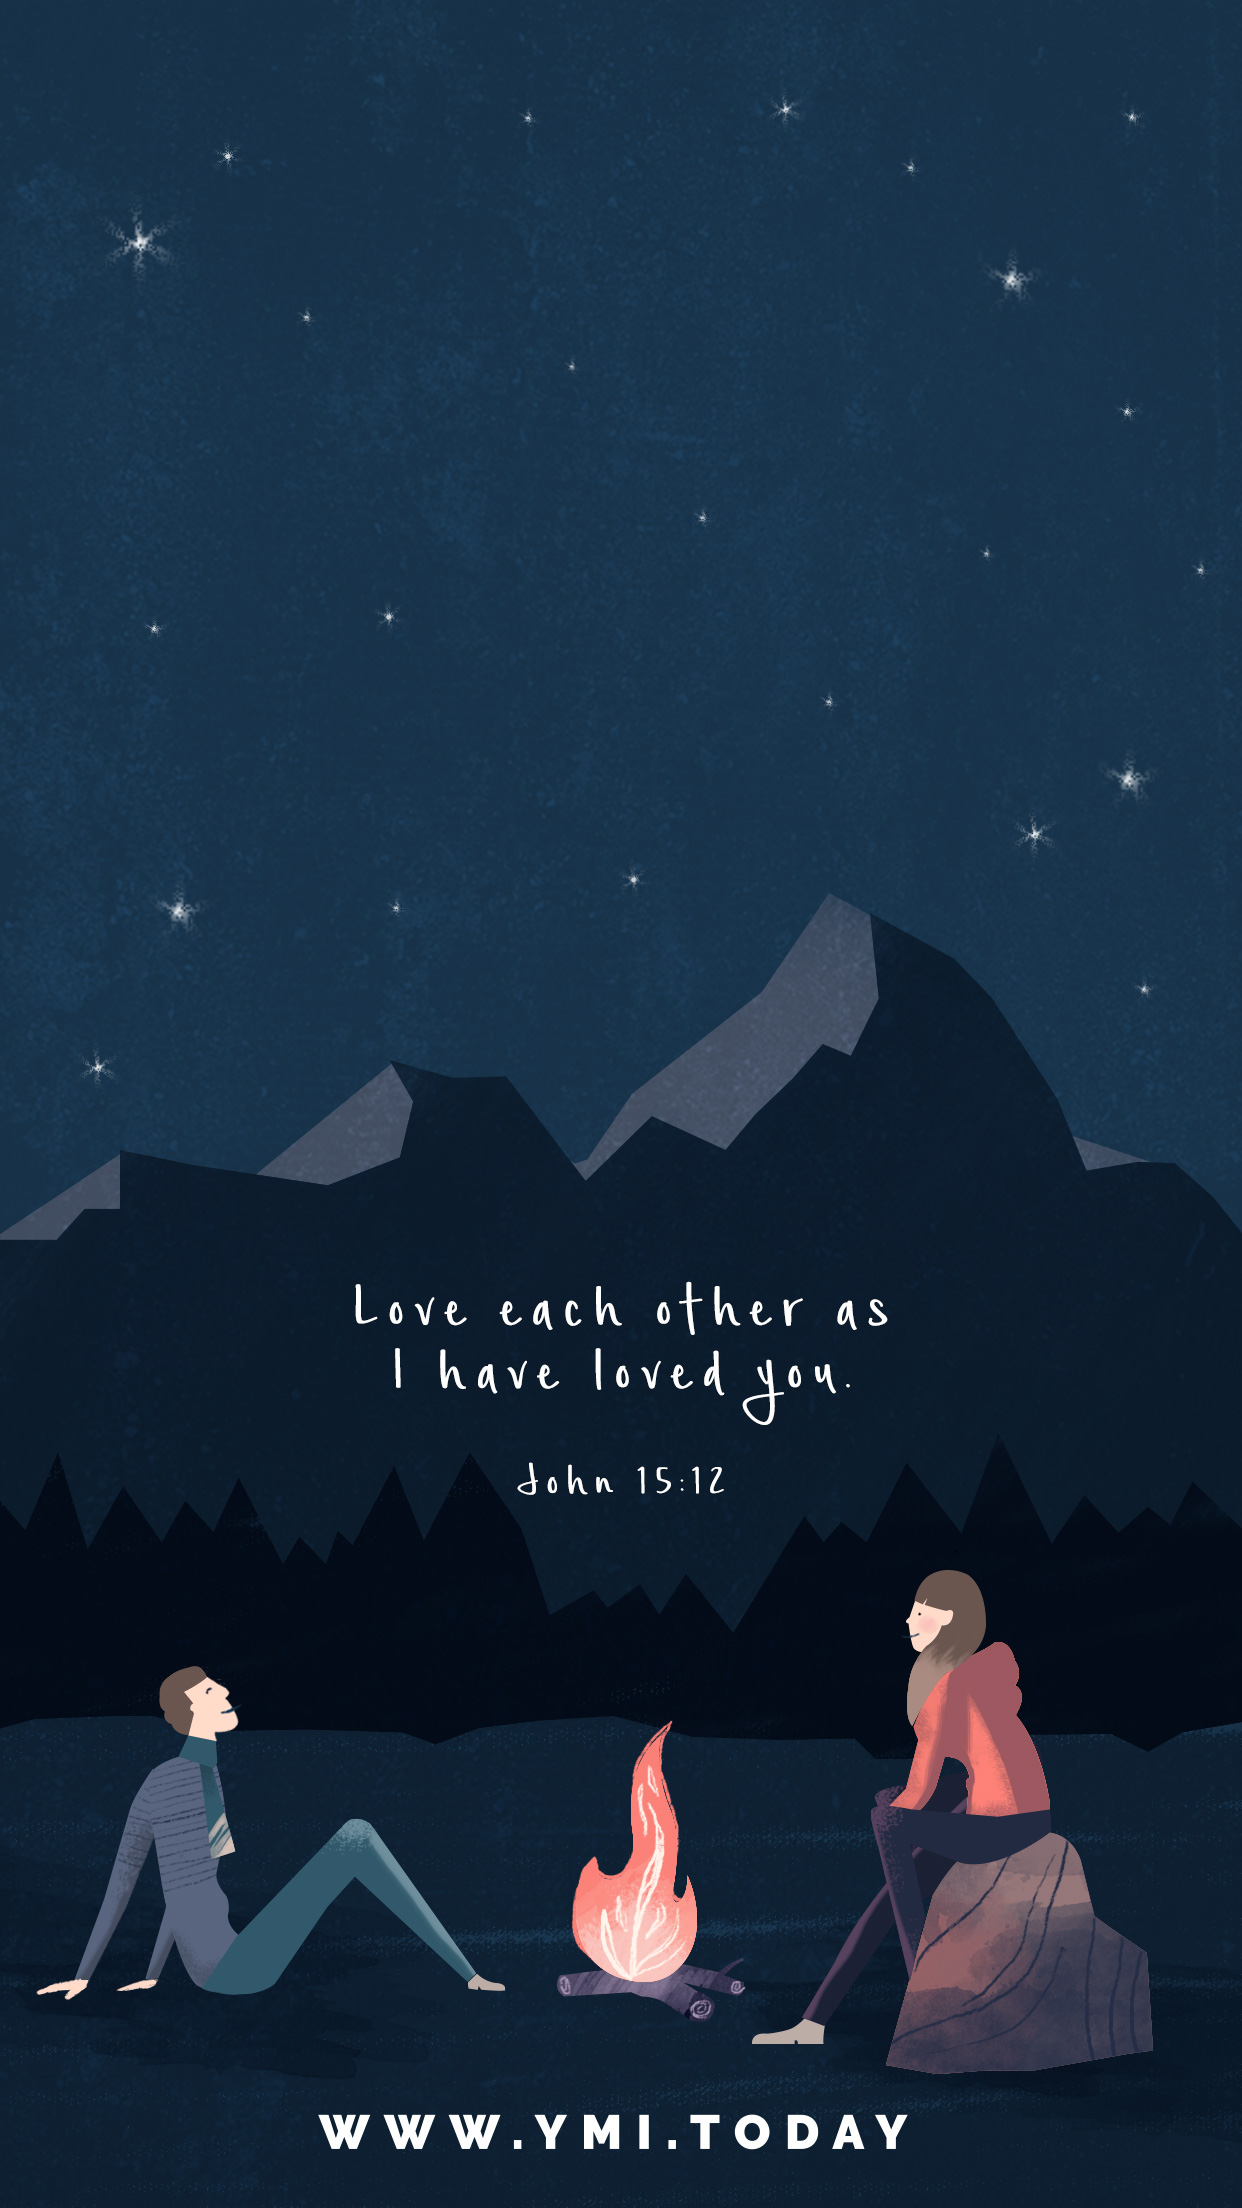 YMI January 2018 Phone Lockscreen - Love each other as I have loved you. - John 15:12